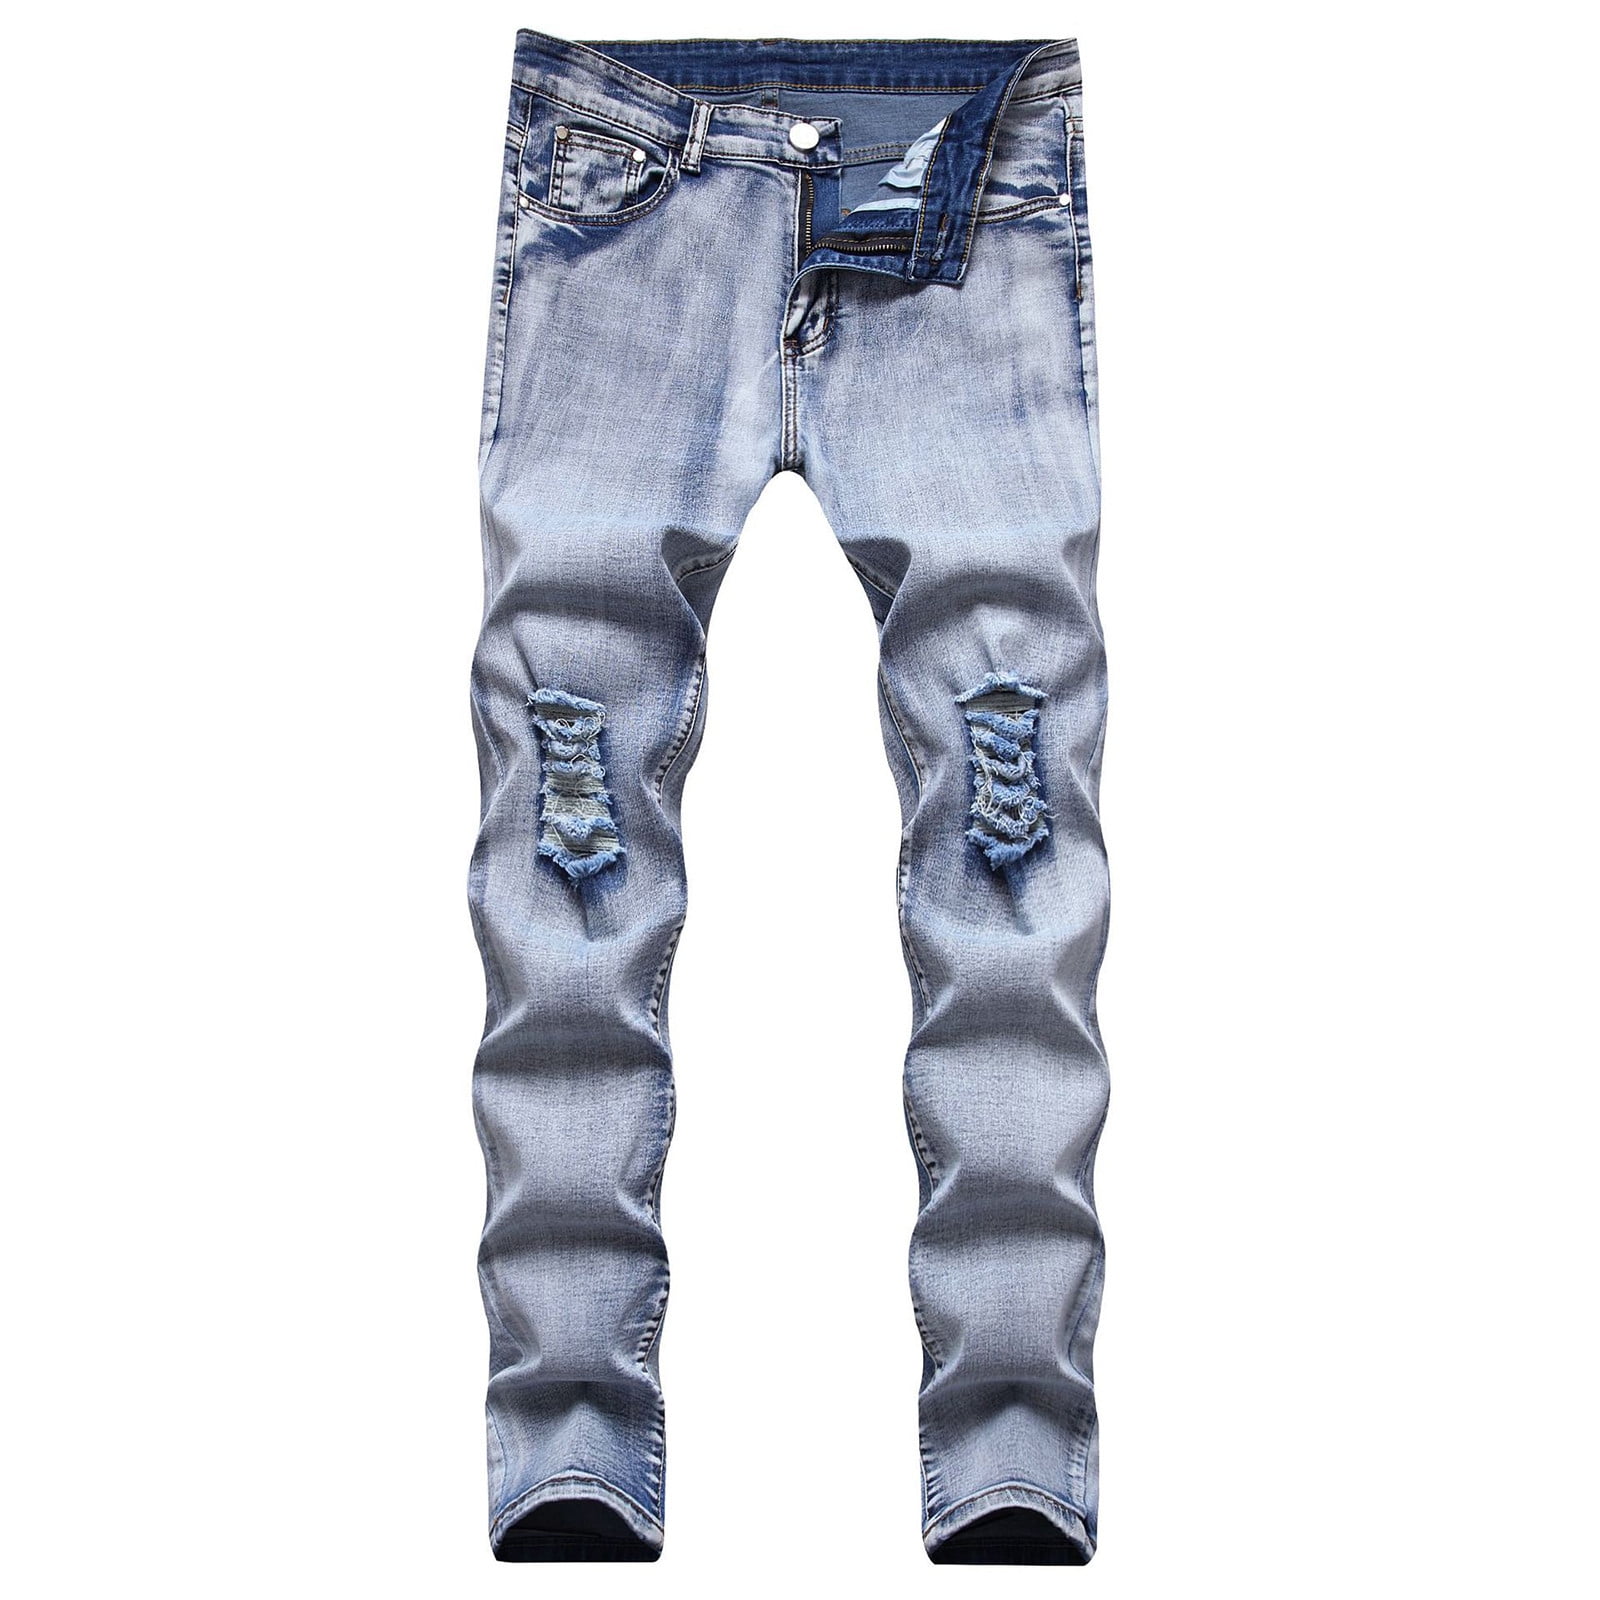 Dezsed Men's Ripped Jeans Clearance Men's New Tight-fitting Ripped Straight Hip-hop Stretch Motorcycle Denim Trouser Light Blue - Walmart.com